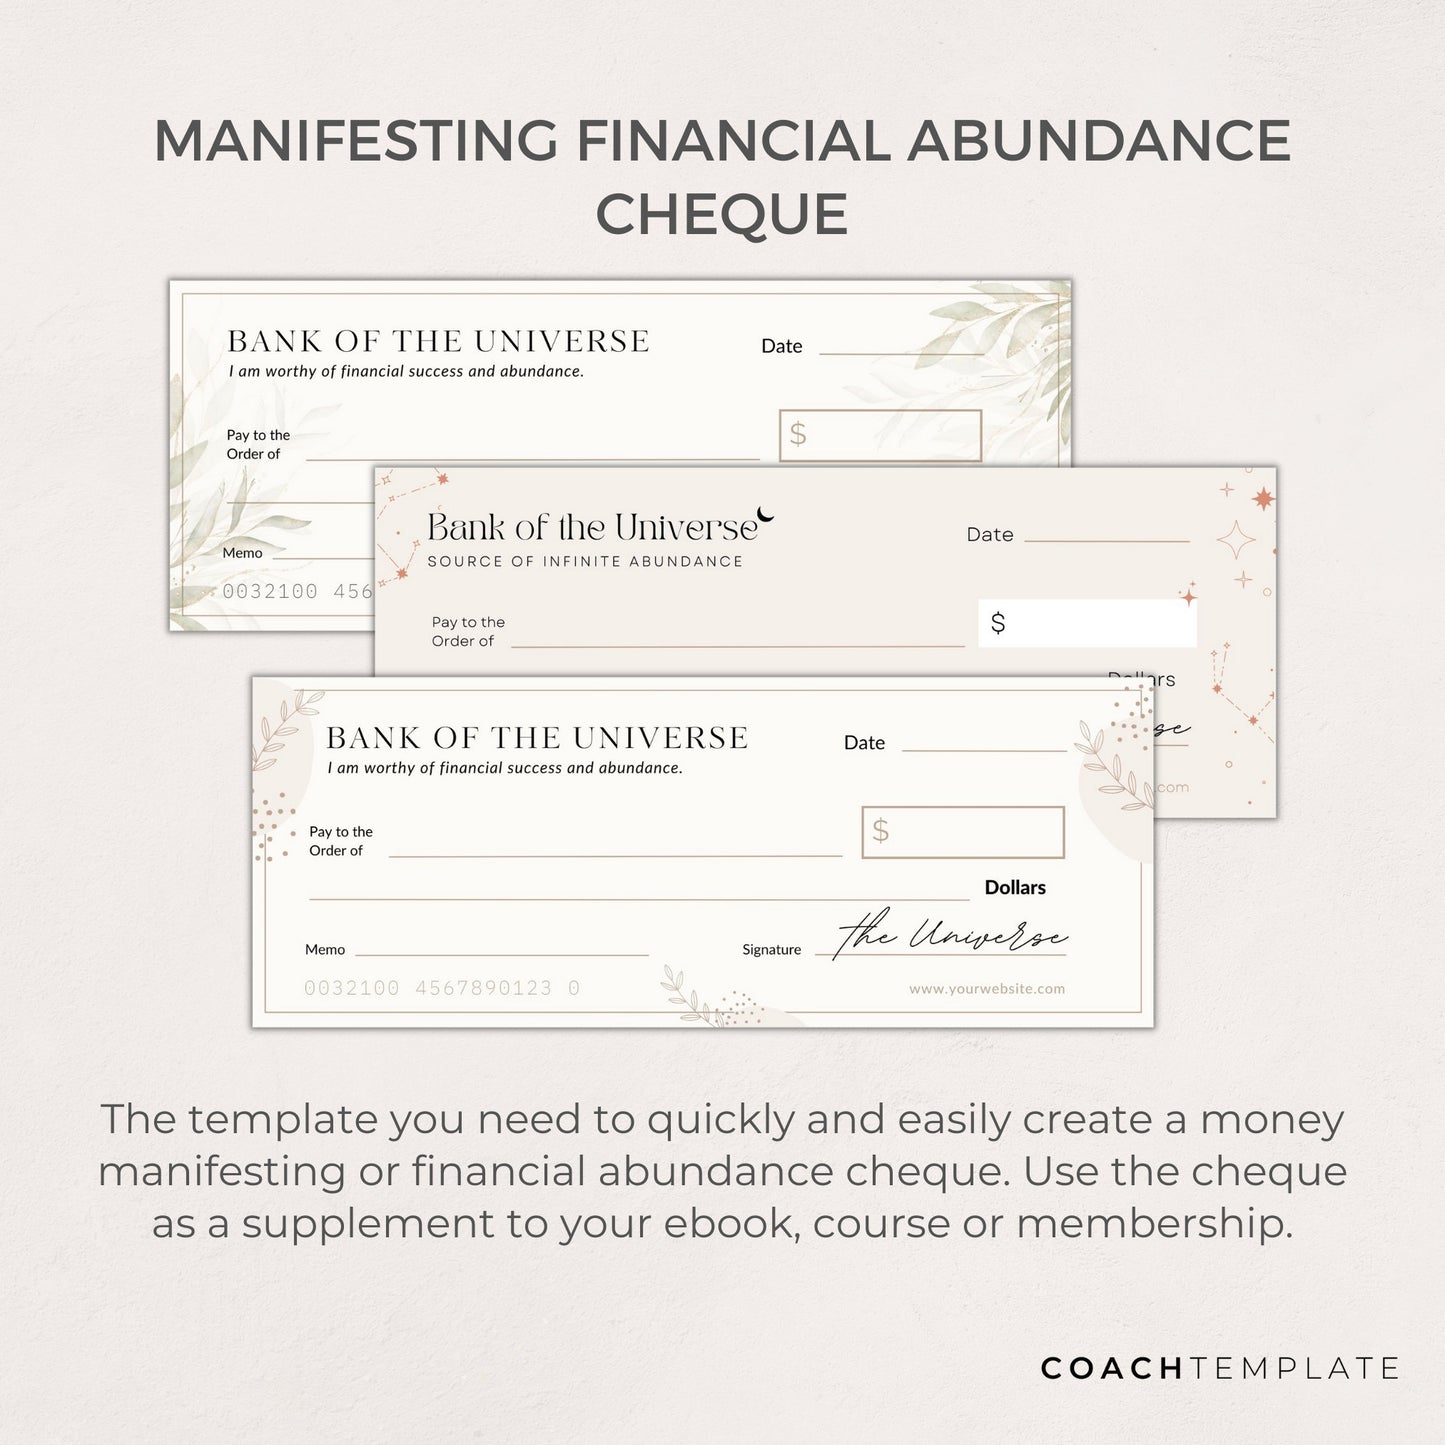 Editable Money Manifesting Cheque, Financial Abundance Manifestation Check Canva Template, Mindset Life Coach Small Business, Commercial Use, Law of Attraction, Done-for-you Content Design Template


CoachTemplate.com CT057